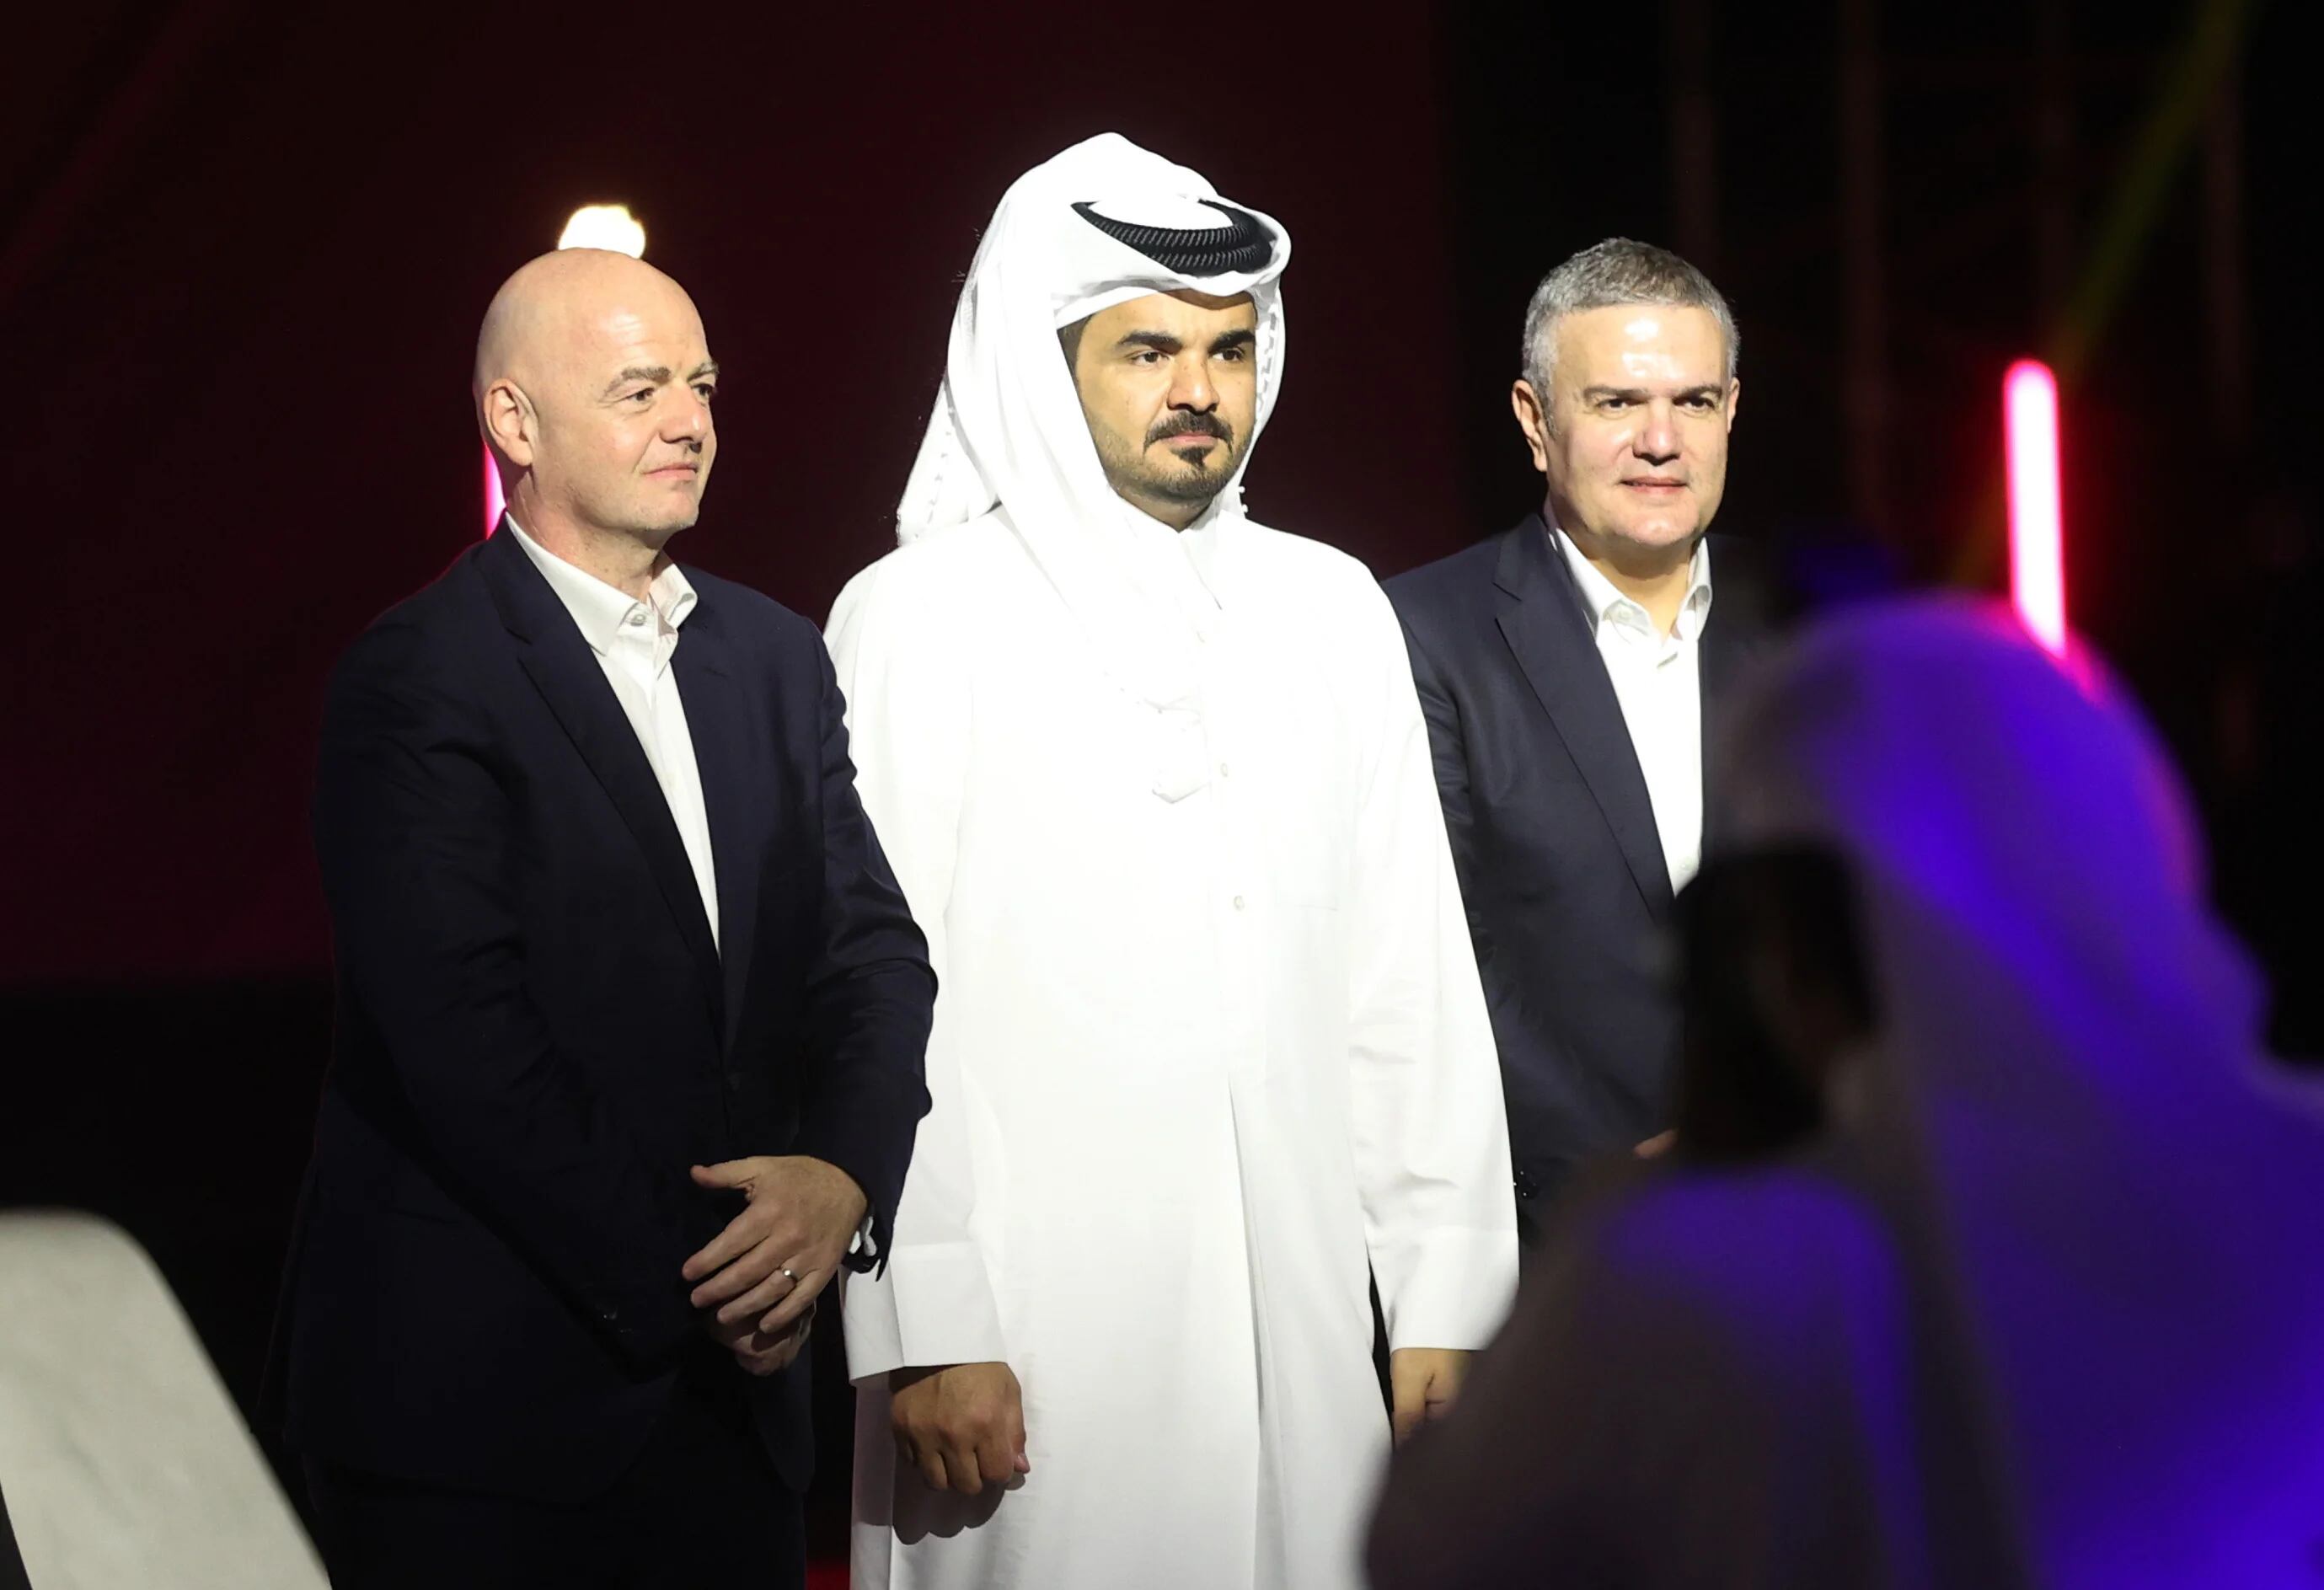 ANOC elects HE Sheikh Joaan bin Hamad Al-Thani Elected as new Asian Senior Vice President